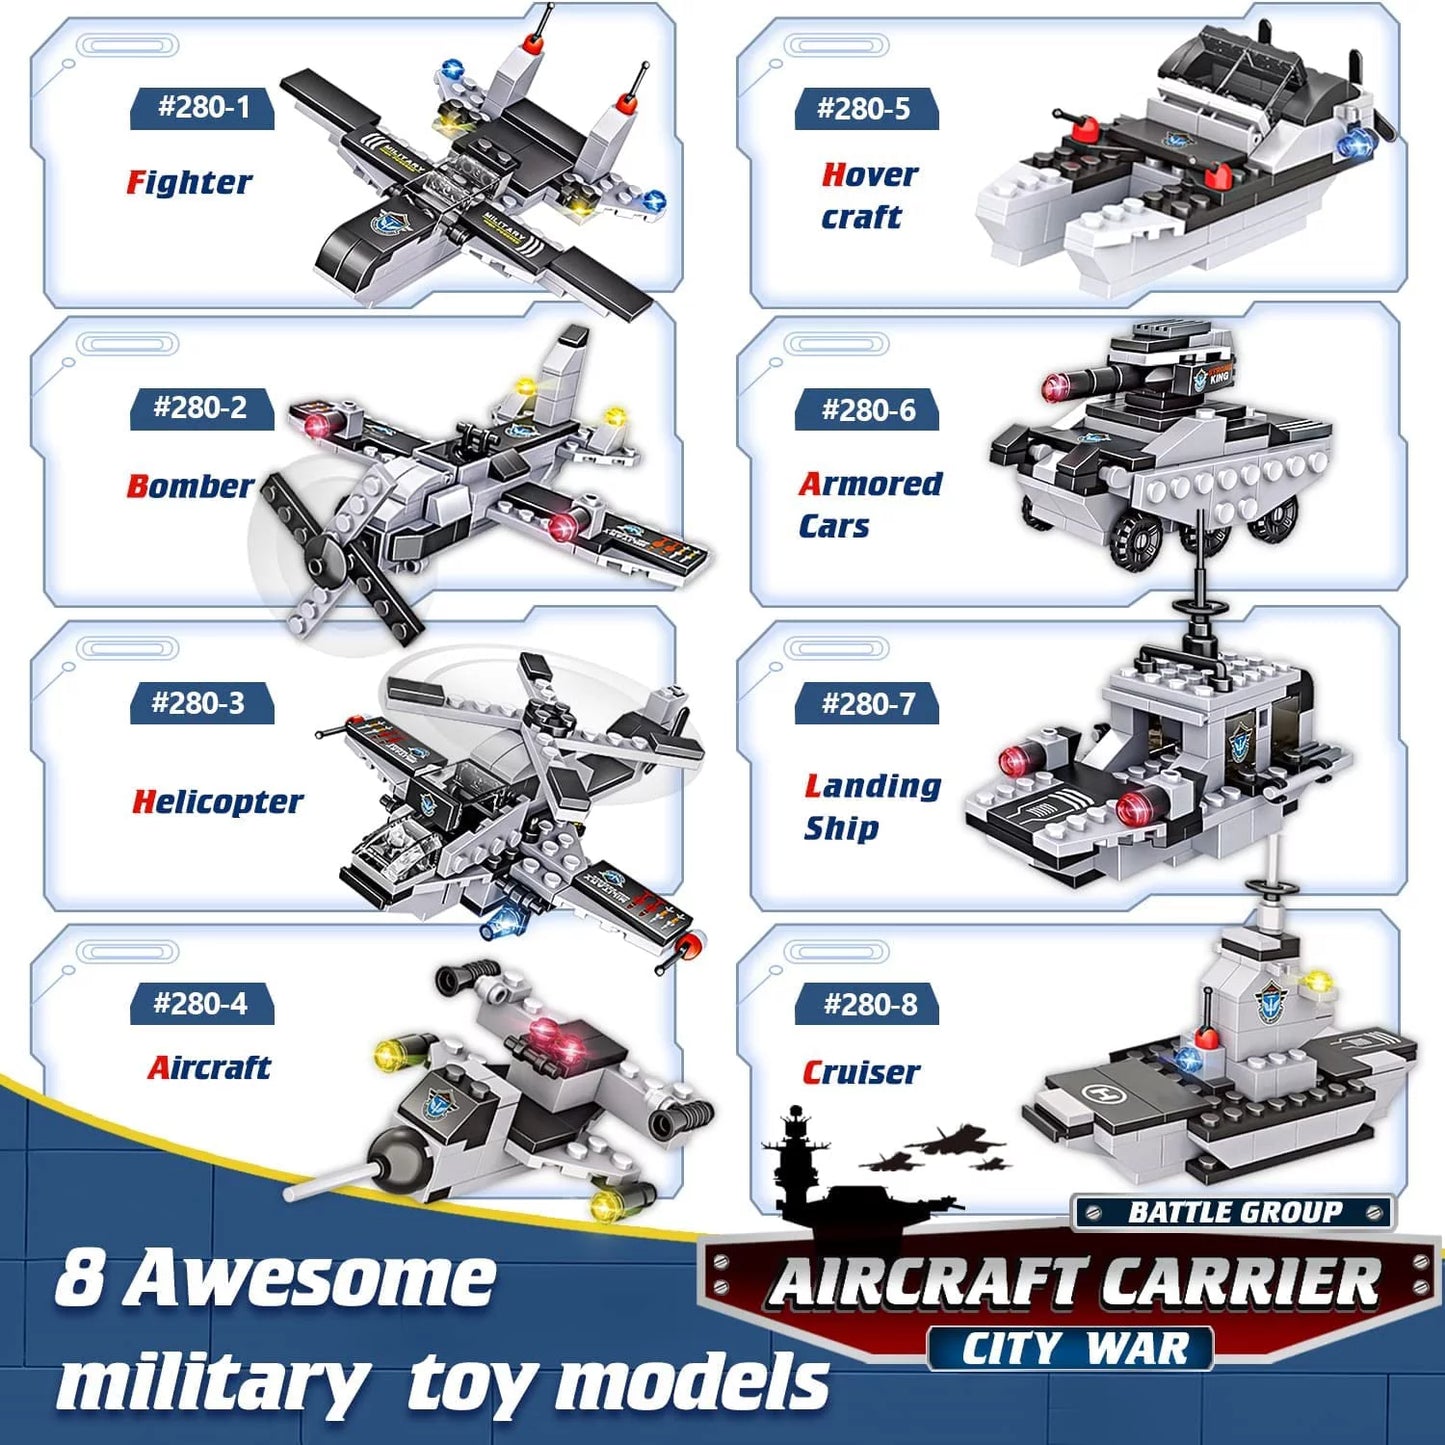 1320 Pieces Aircraft Carrier Building Blocks Set, Military Battleship Model Toy with Army Car, Helicopter & Boat, Military Toys Gift for Kids Boys Girls Age 6-12